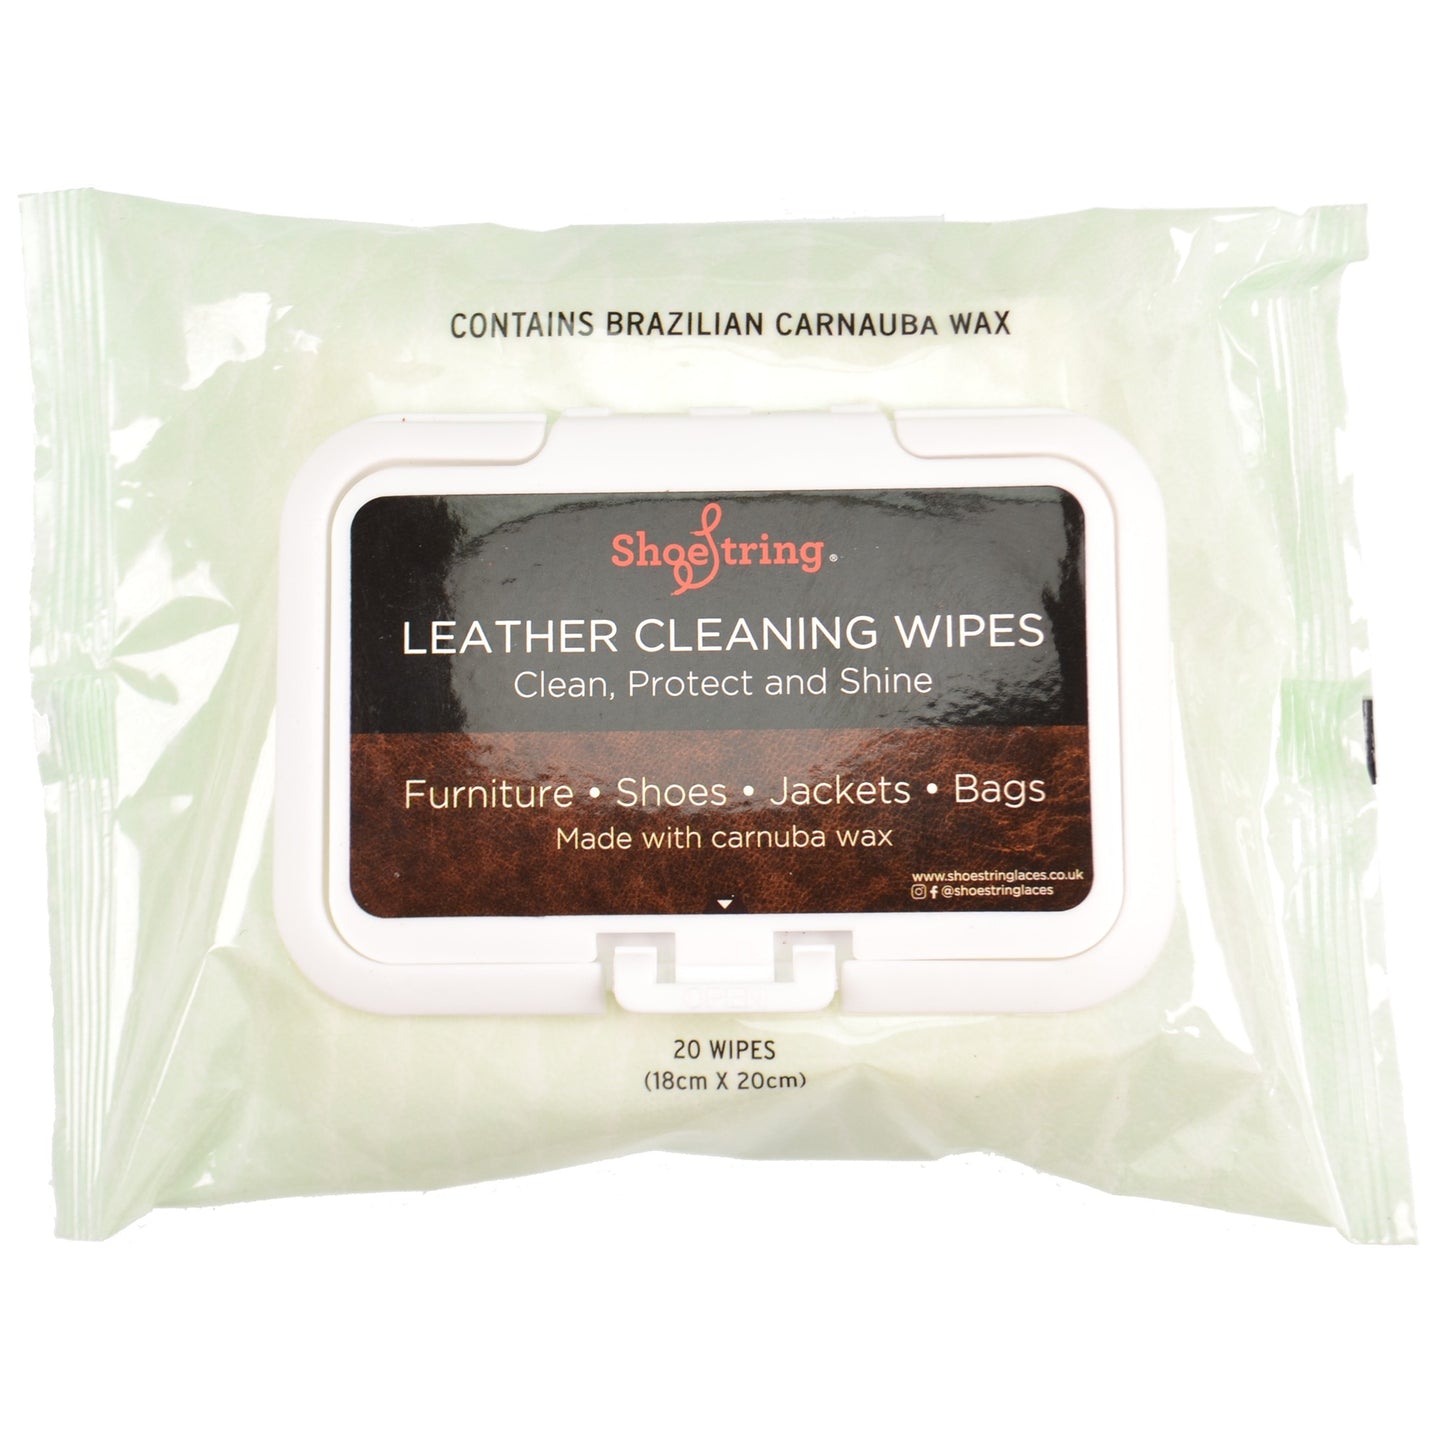 Leather Cleaning Wipes with Carnuaba Wax